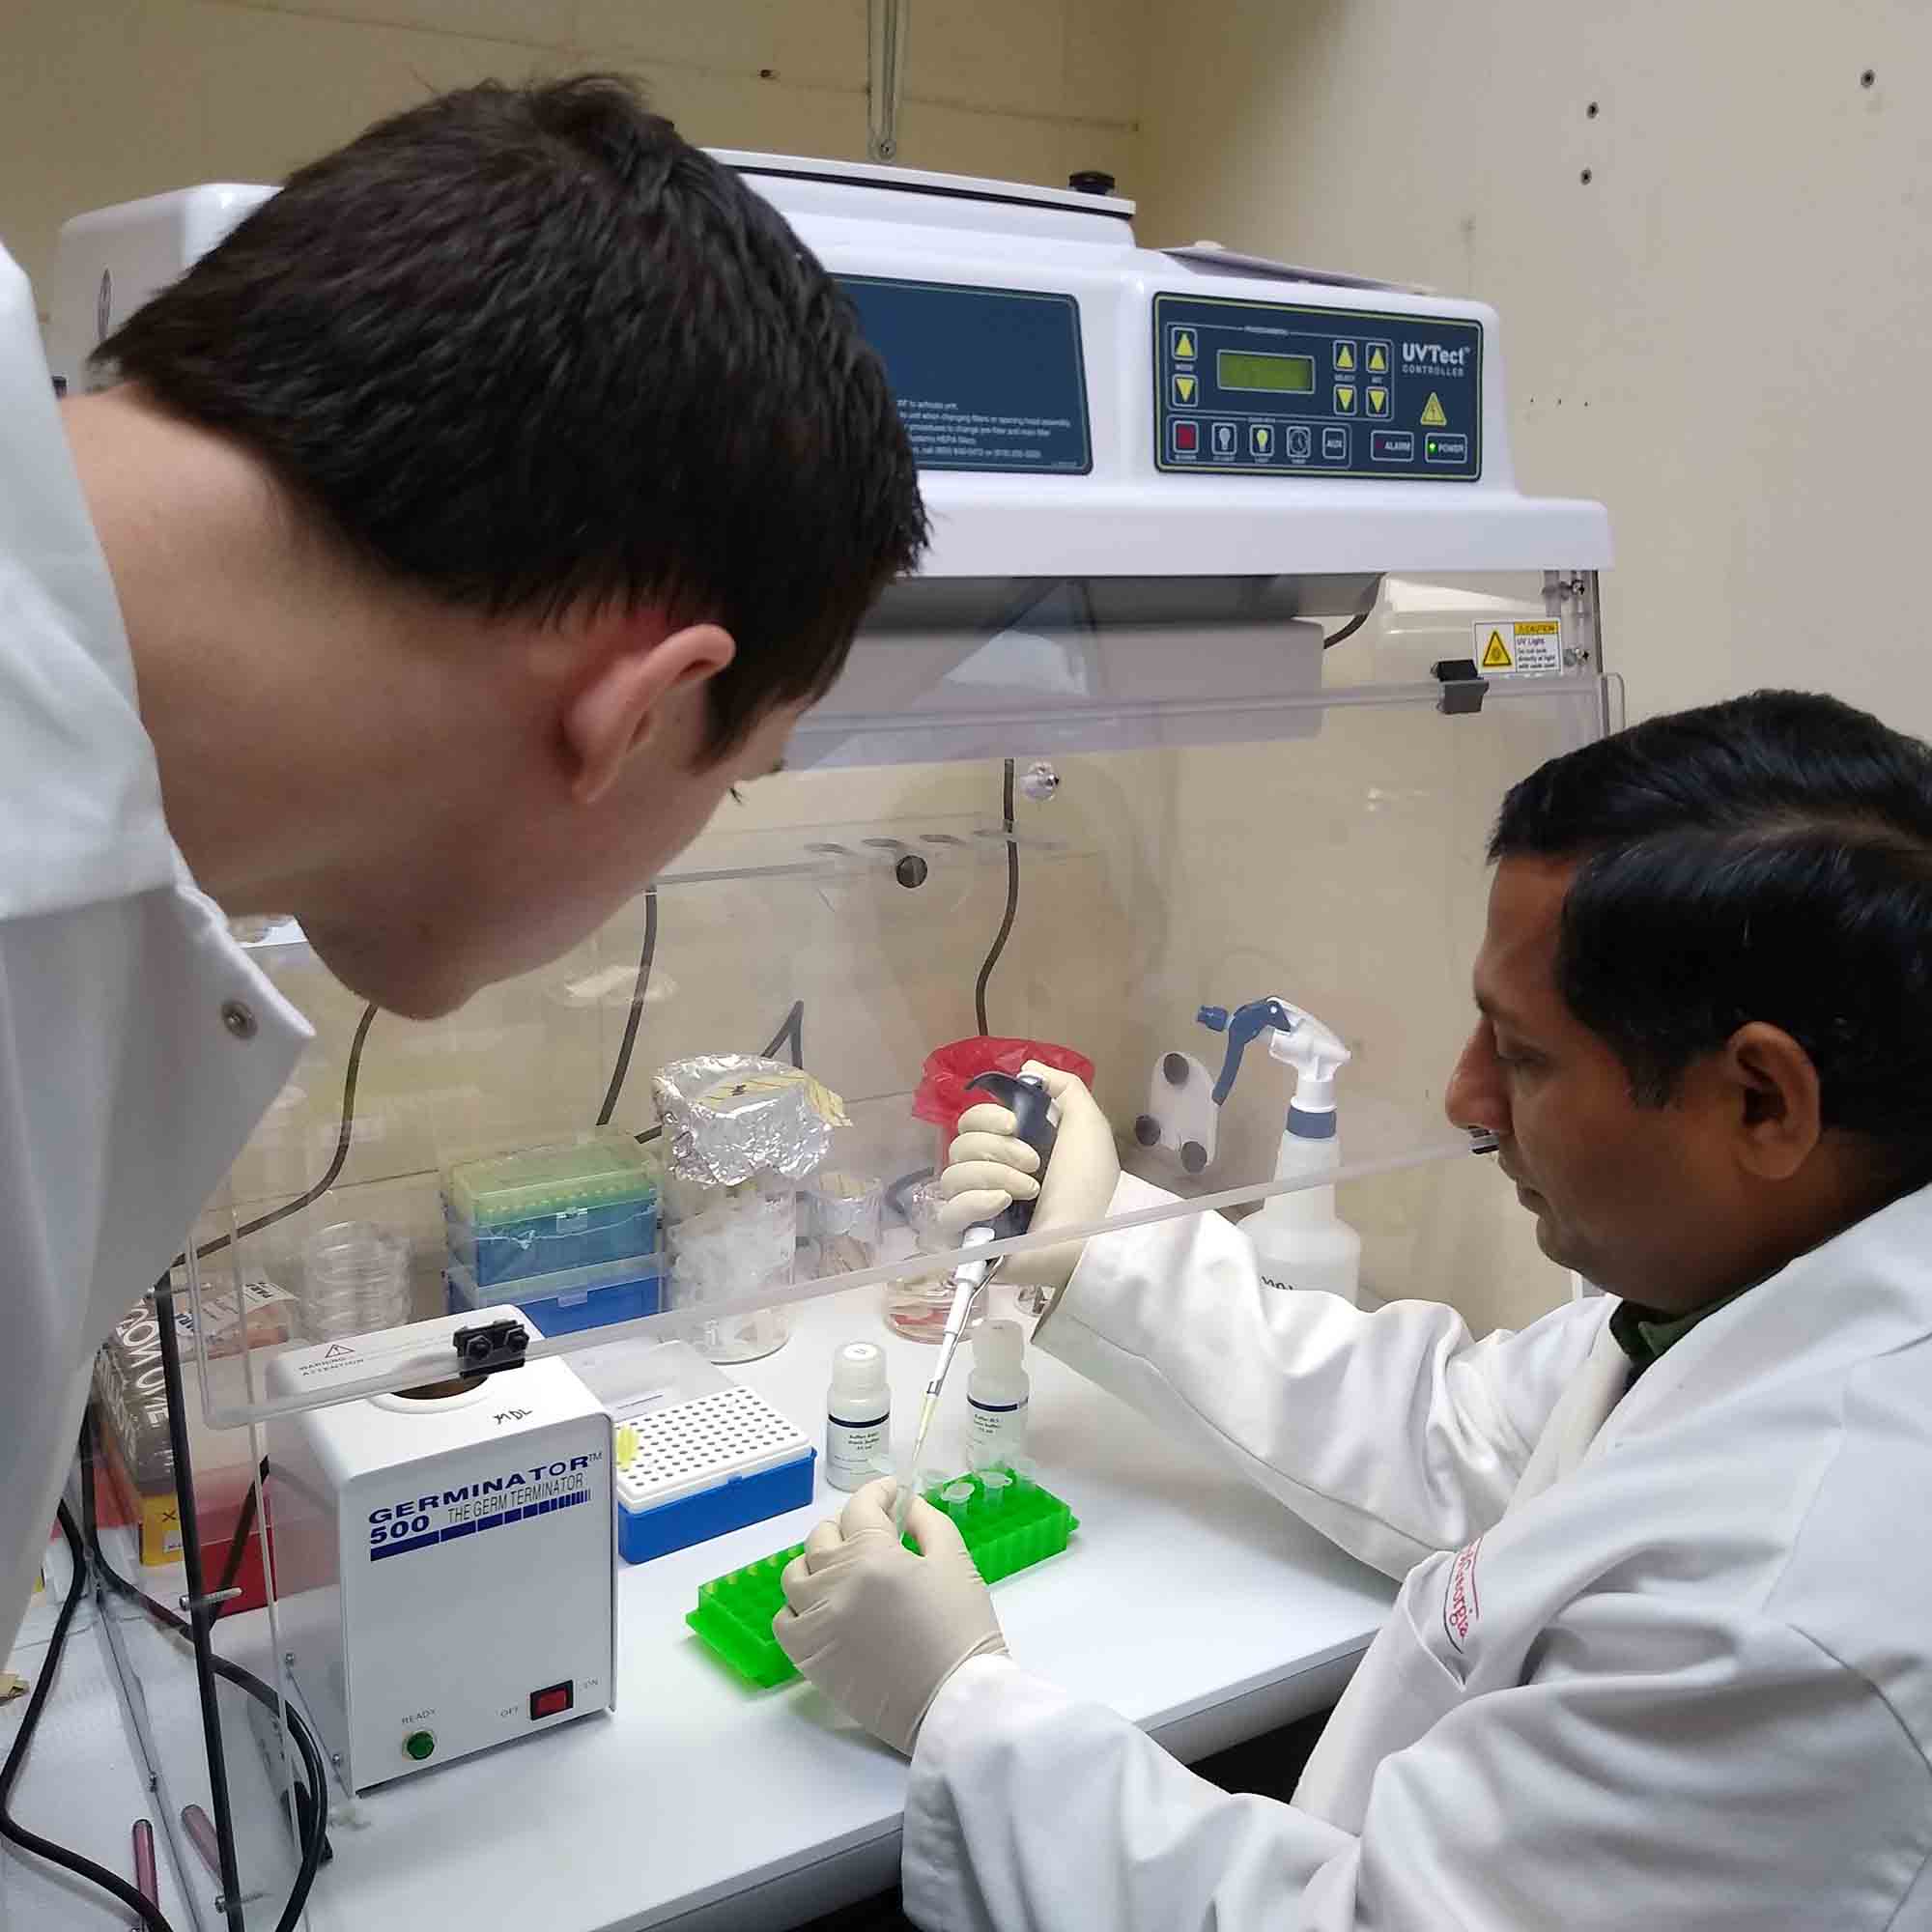 UGA plant pathology graduate student Owen Hudson (left) and research scientist Emran Ali (right) helped develop a faster protocol for detecting Fusarium wilt disease through a PCR assay.